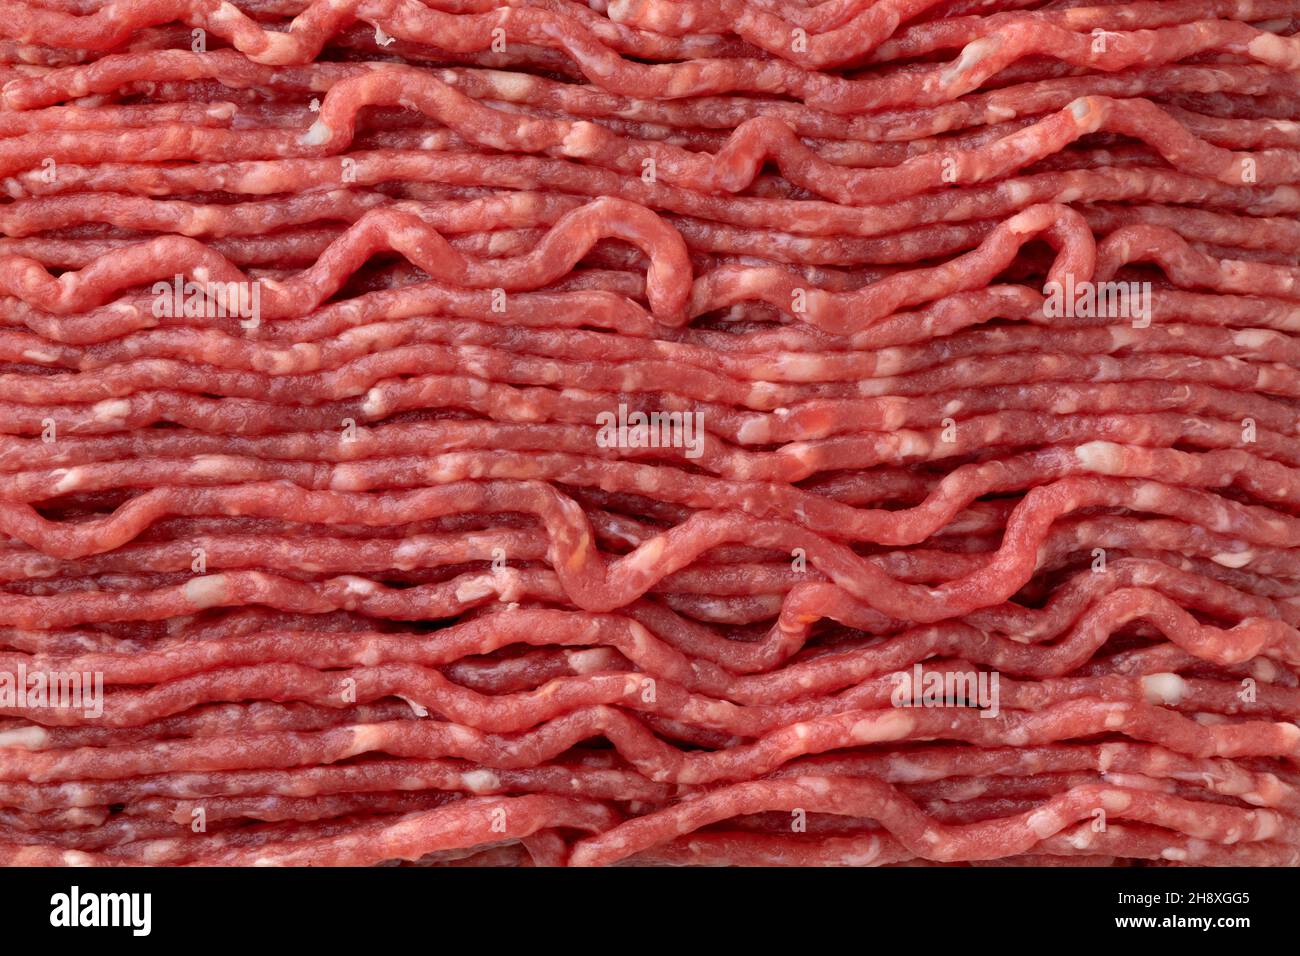 Fresh raw low fat ground beef full frame close up as background Stock Photo